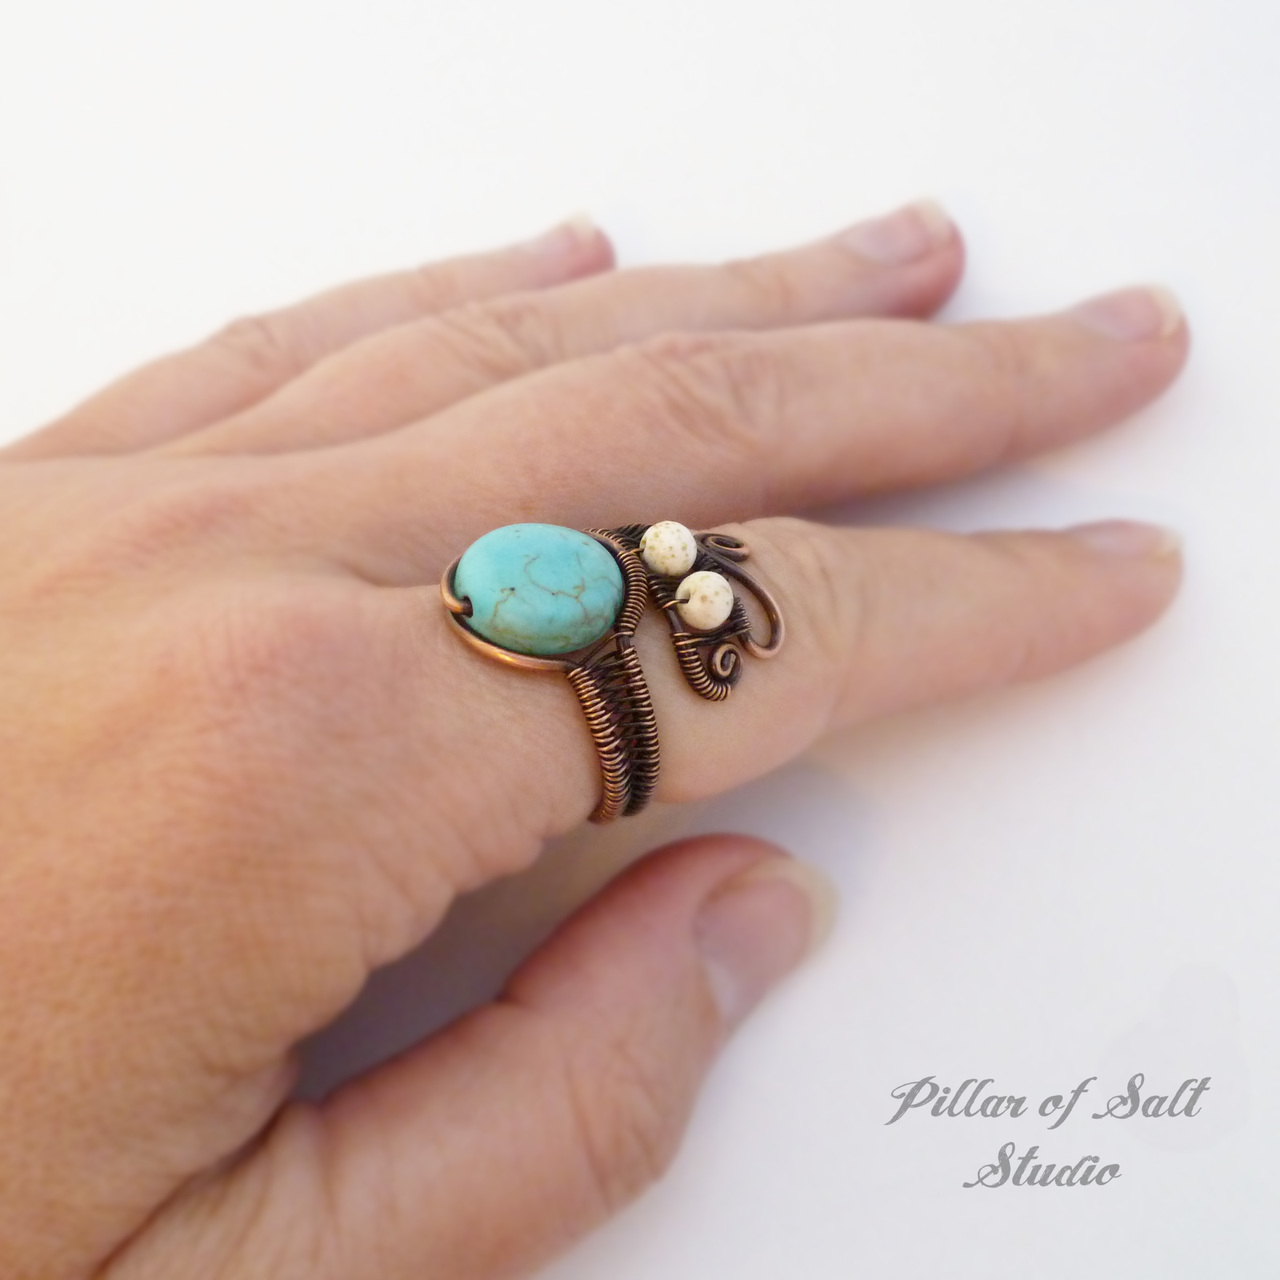 Adjustable Copper Wire wrapped ring with turquoise magnesite beads / Pillar of Salt Studio